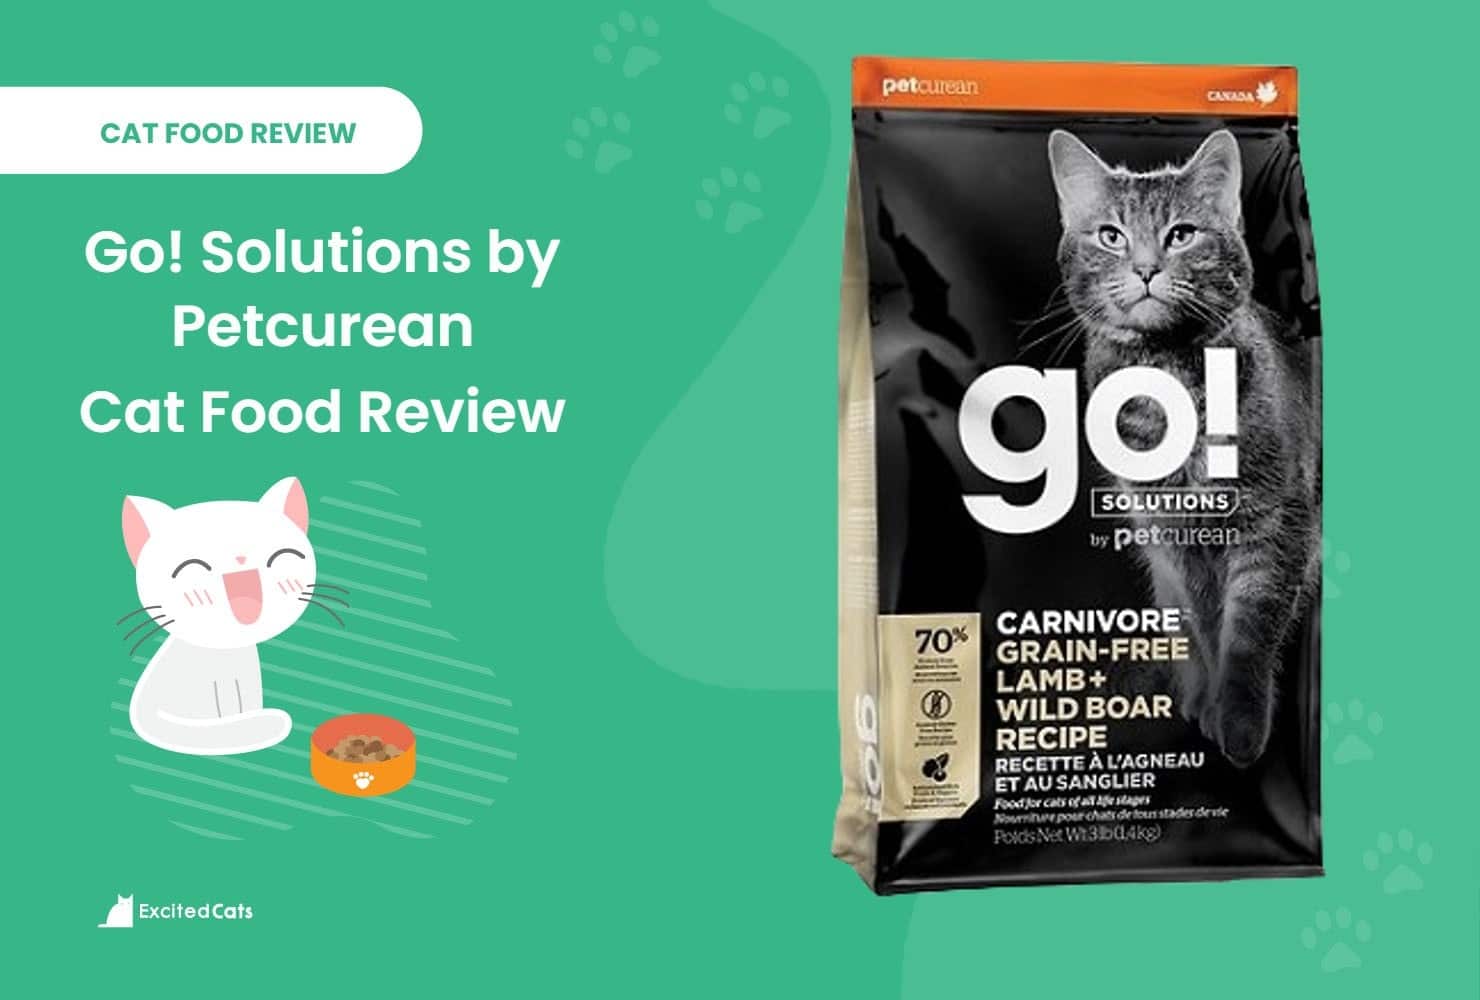 at food review_ Go! Solutions by Petcurean